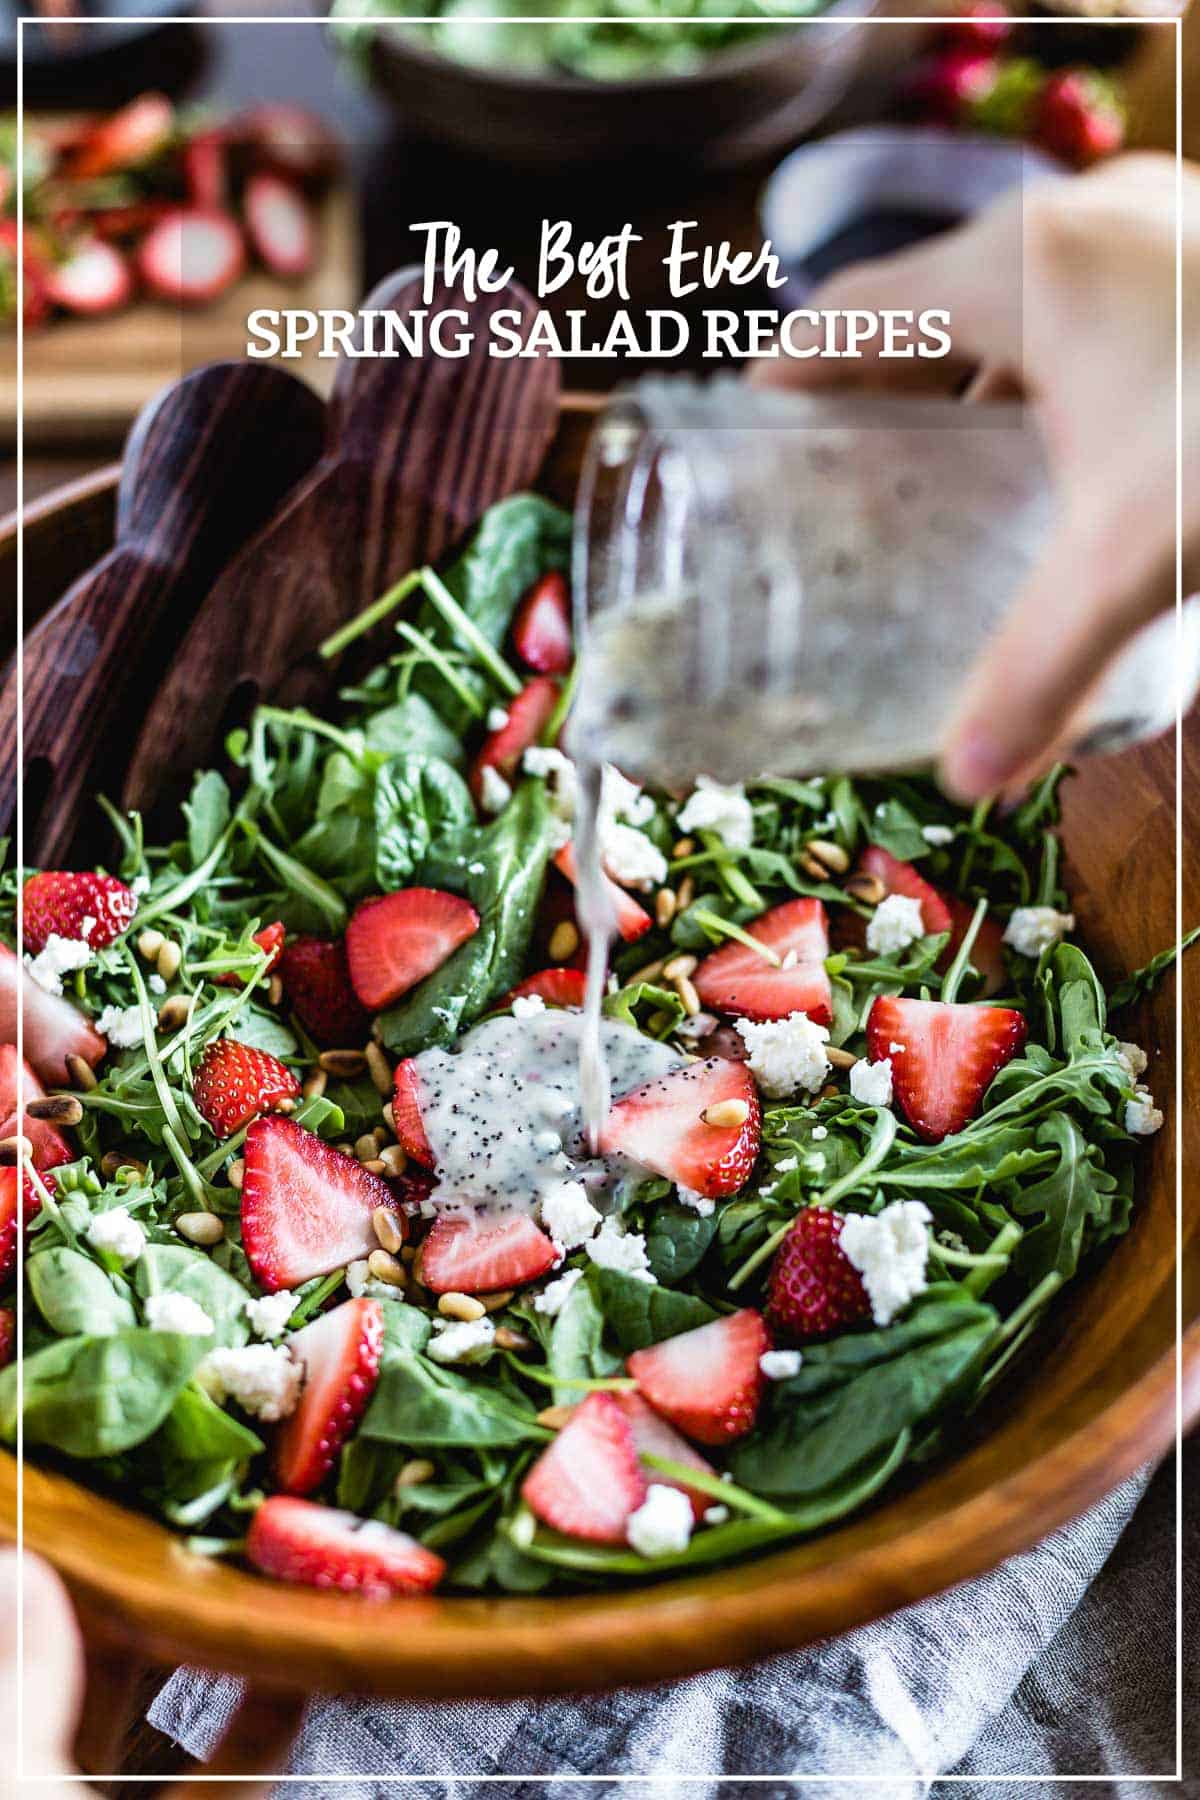 Spring salad being drizzled with dressing with text on the image.